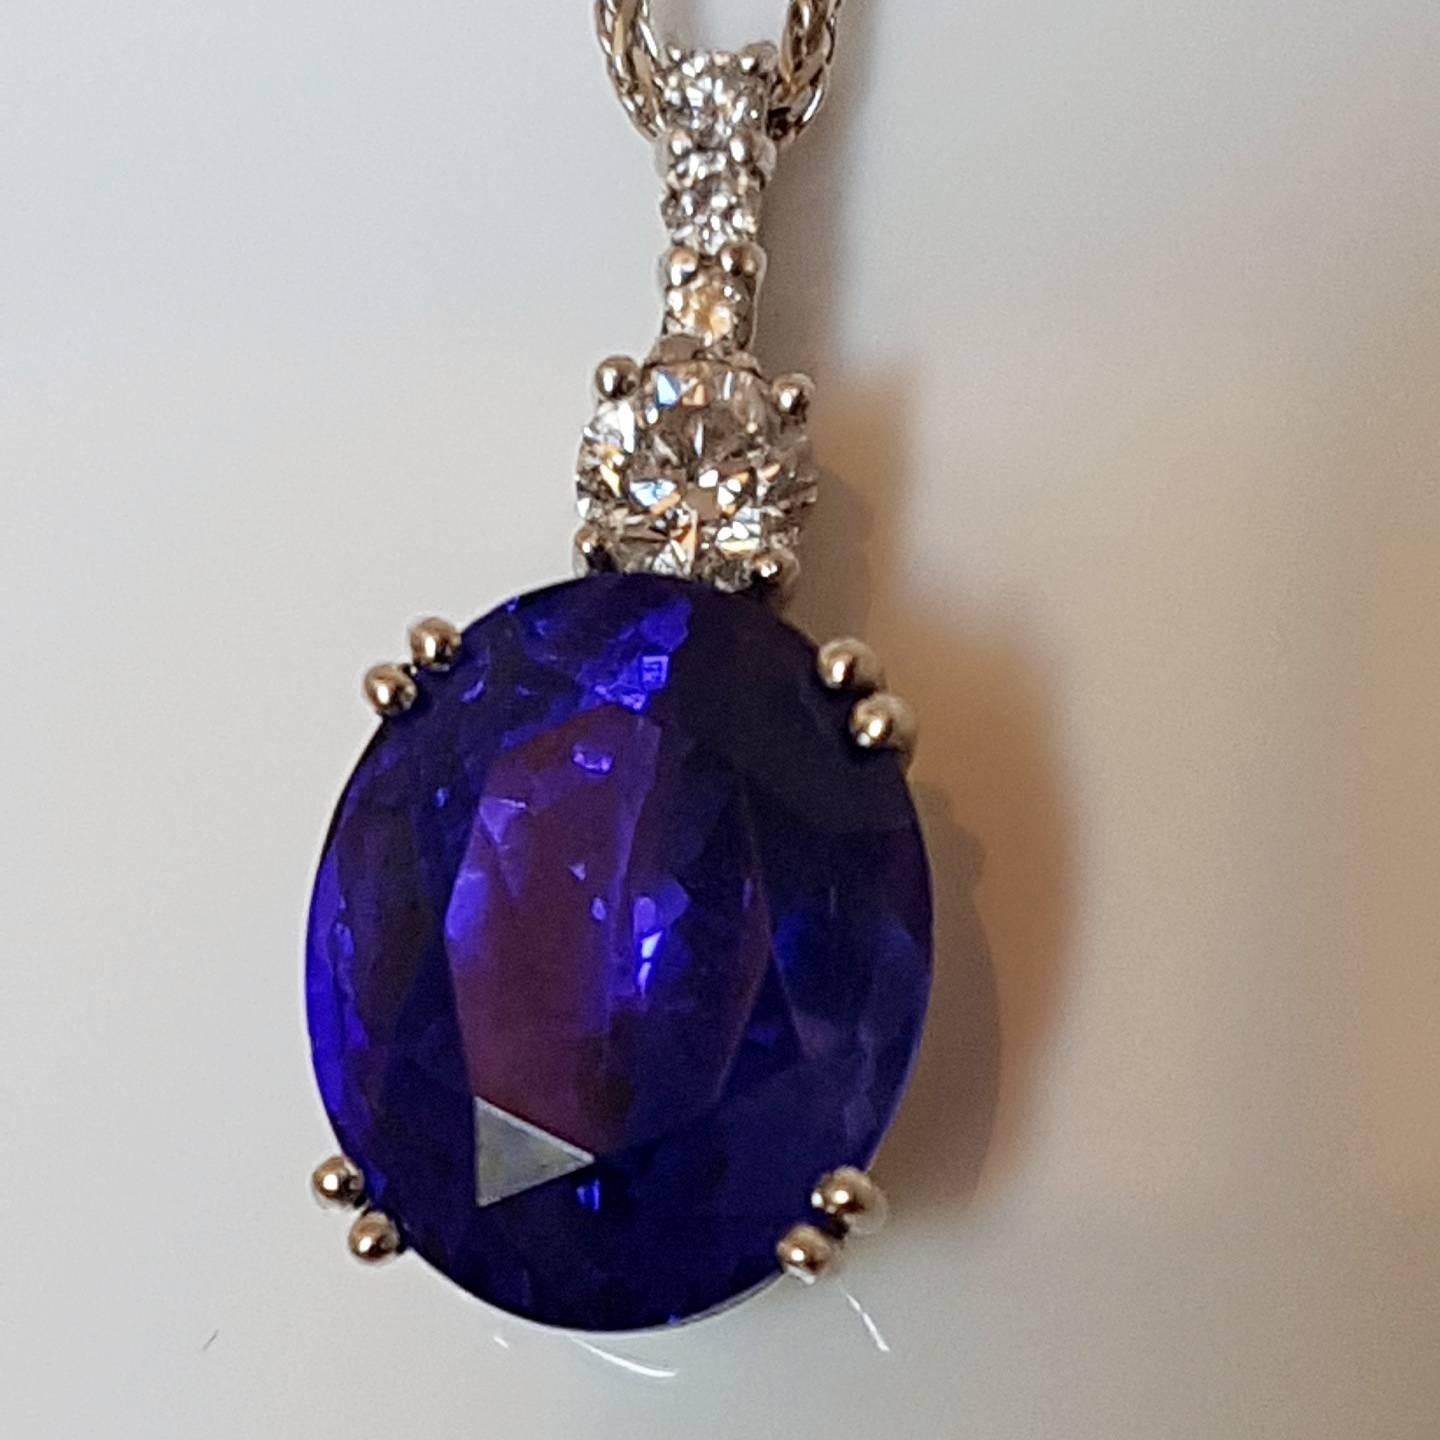 Pendant with deep purple oval tanzanite estimated 8.63ct (13.10mm x 10.73mm x 8.25mm) with 1 diamond 0.30cts, G, SI1, and 3 diamonds 0.08cts total G, VS1, set in platinum.  All stones claw set. Stamped Pt900. With 44cm 18ct white gold chain. This